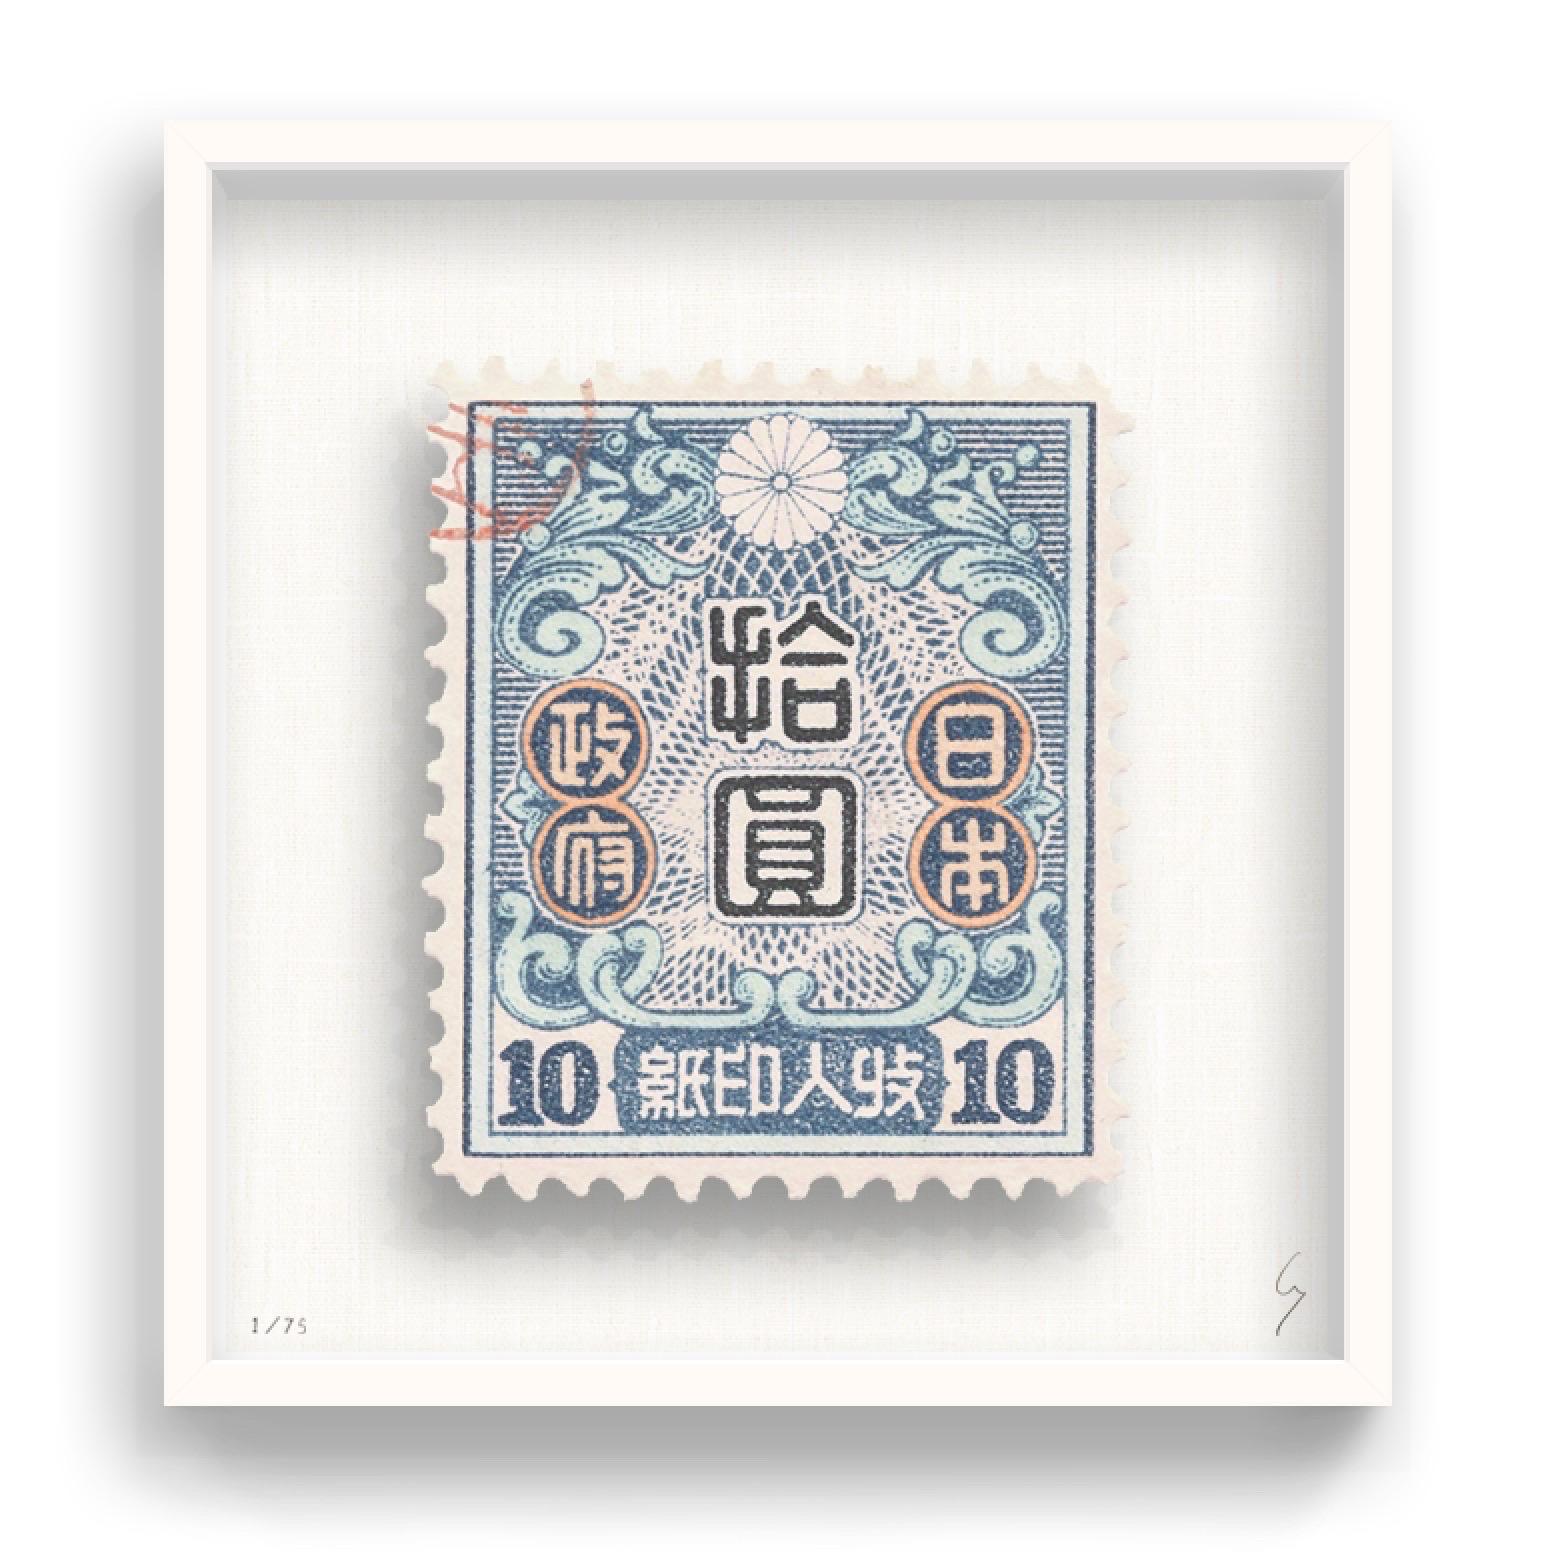 Guy Gee, Japan (medium)

Hand-engraved print on 350gsm on G.F Smith card
53 x 56cm (20 4/5 x 22 2/5 in)
Frame included 
Edition of 75 

Each artwork by Guy had been digitally reimagined from an original postage stamp. Cut out and finished by hand,